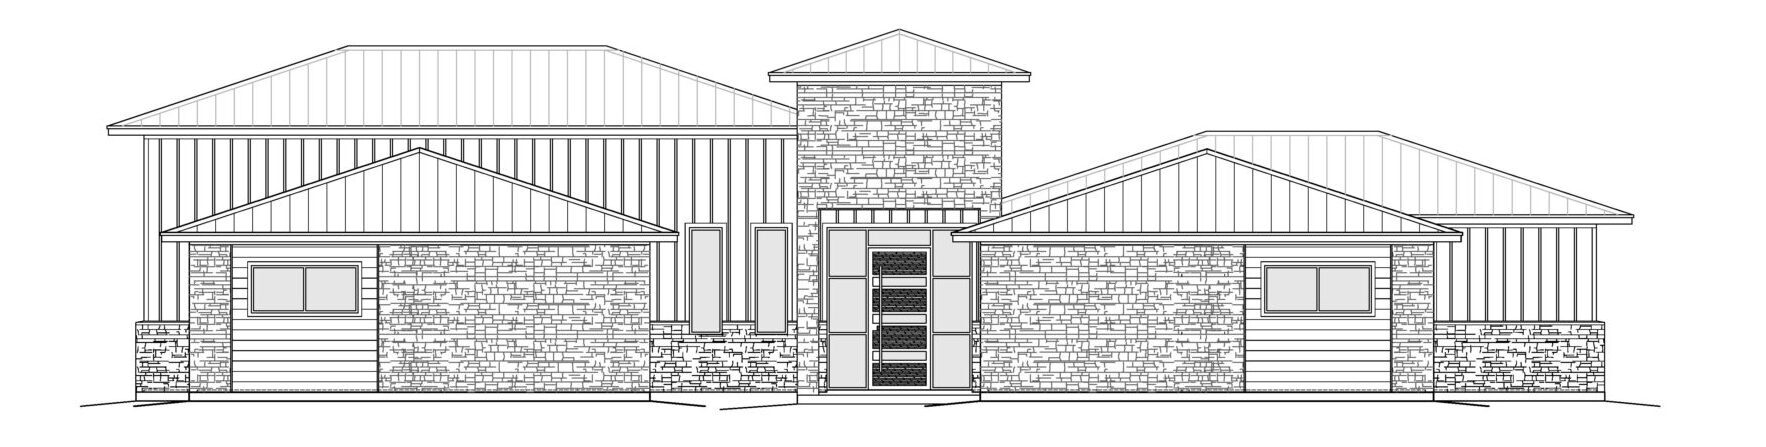 Patterson Parade_Front Elevation_4-13-24 (1)